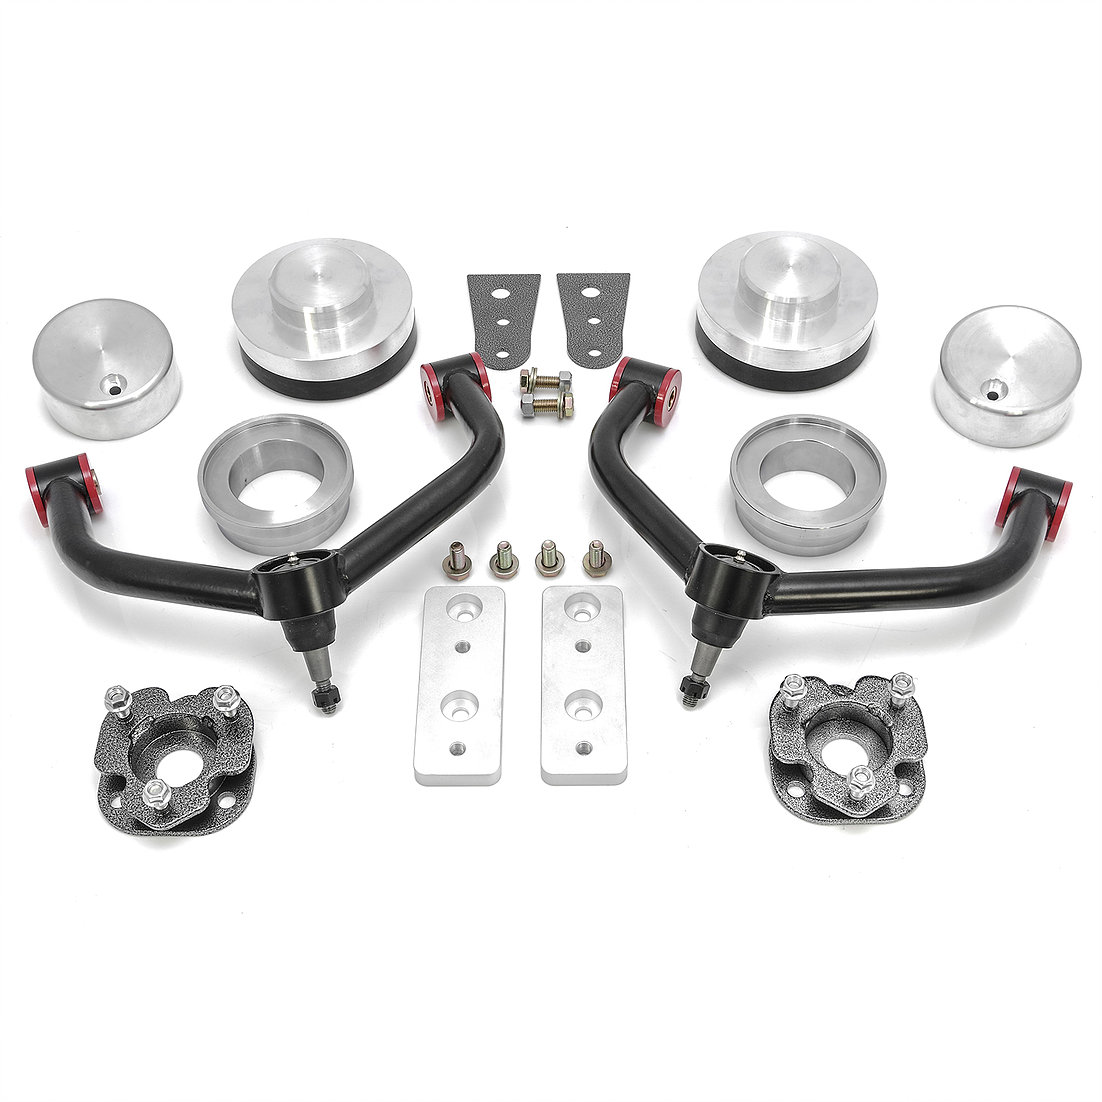 Details about  / 2009-2019 Ram 1500 2WD 4x2 Steel Rear 2/" Top Suspension Lift Kit